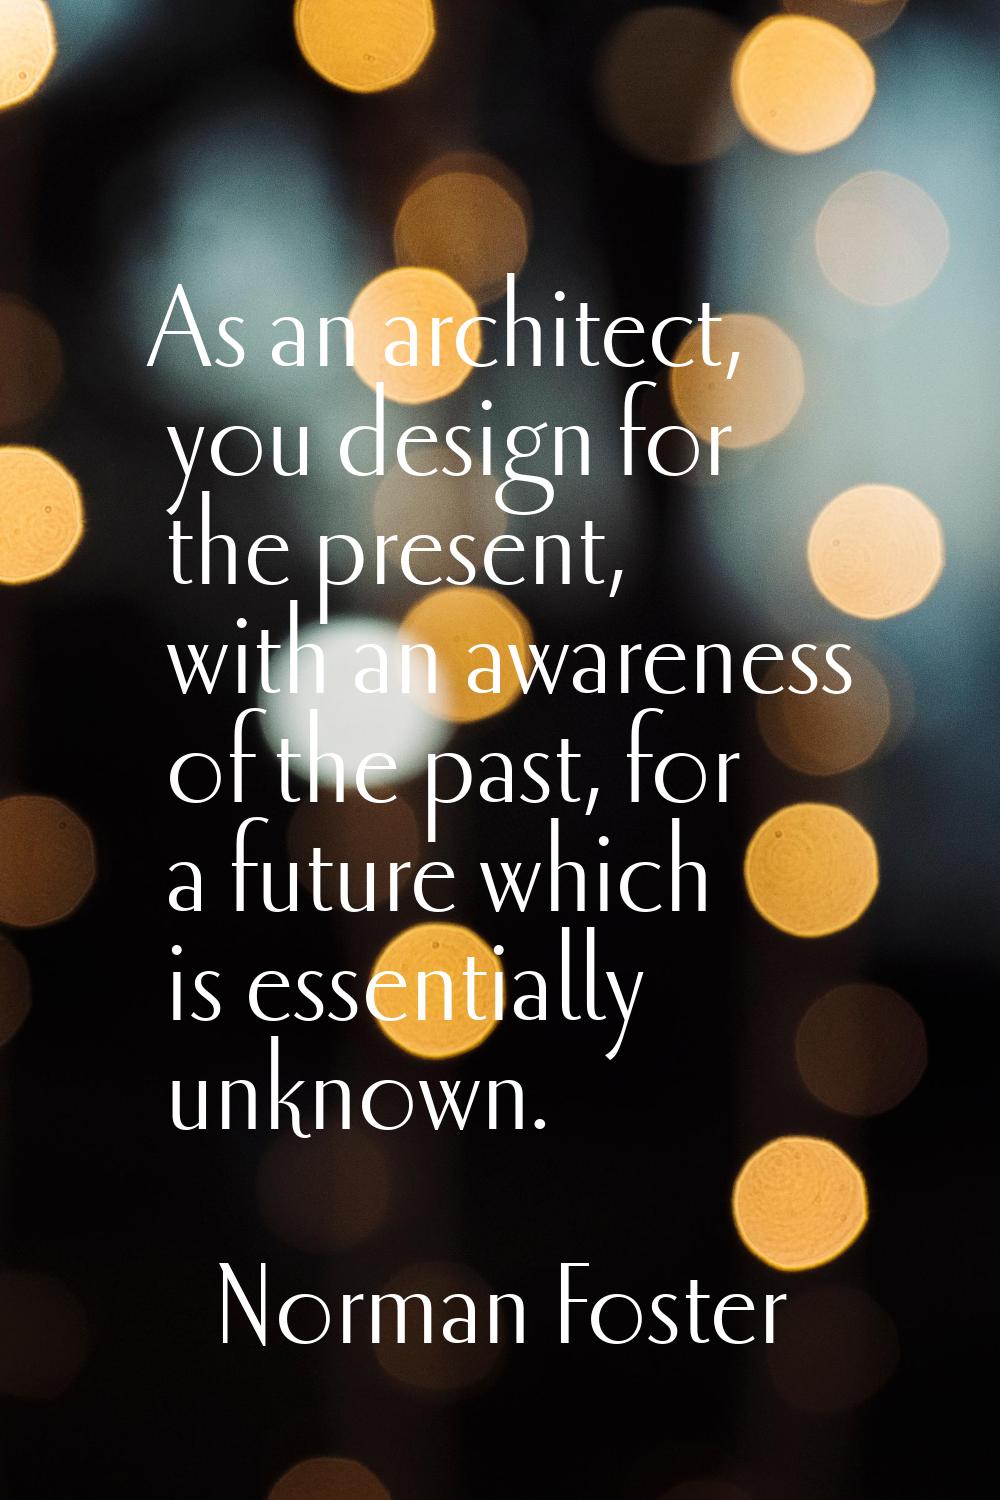 As an architect, you design for the present, with an awareness of the past, for a future which is e